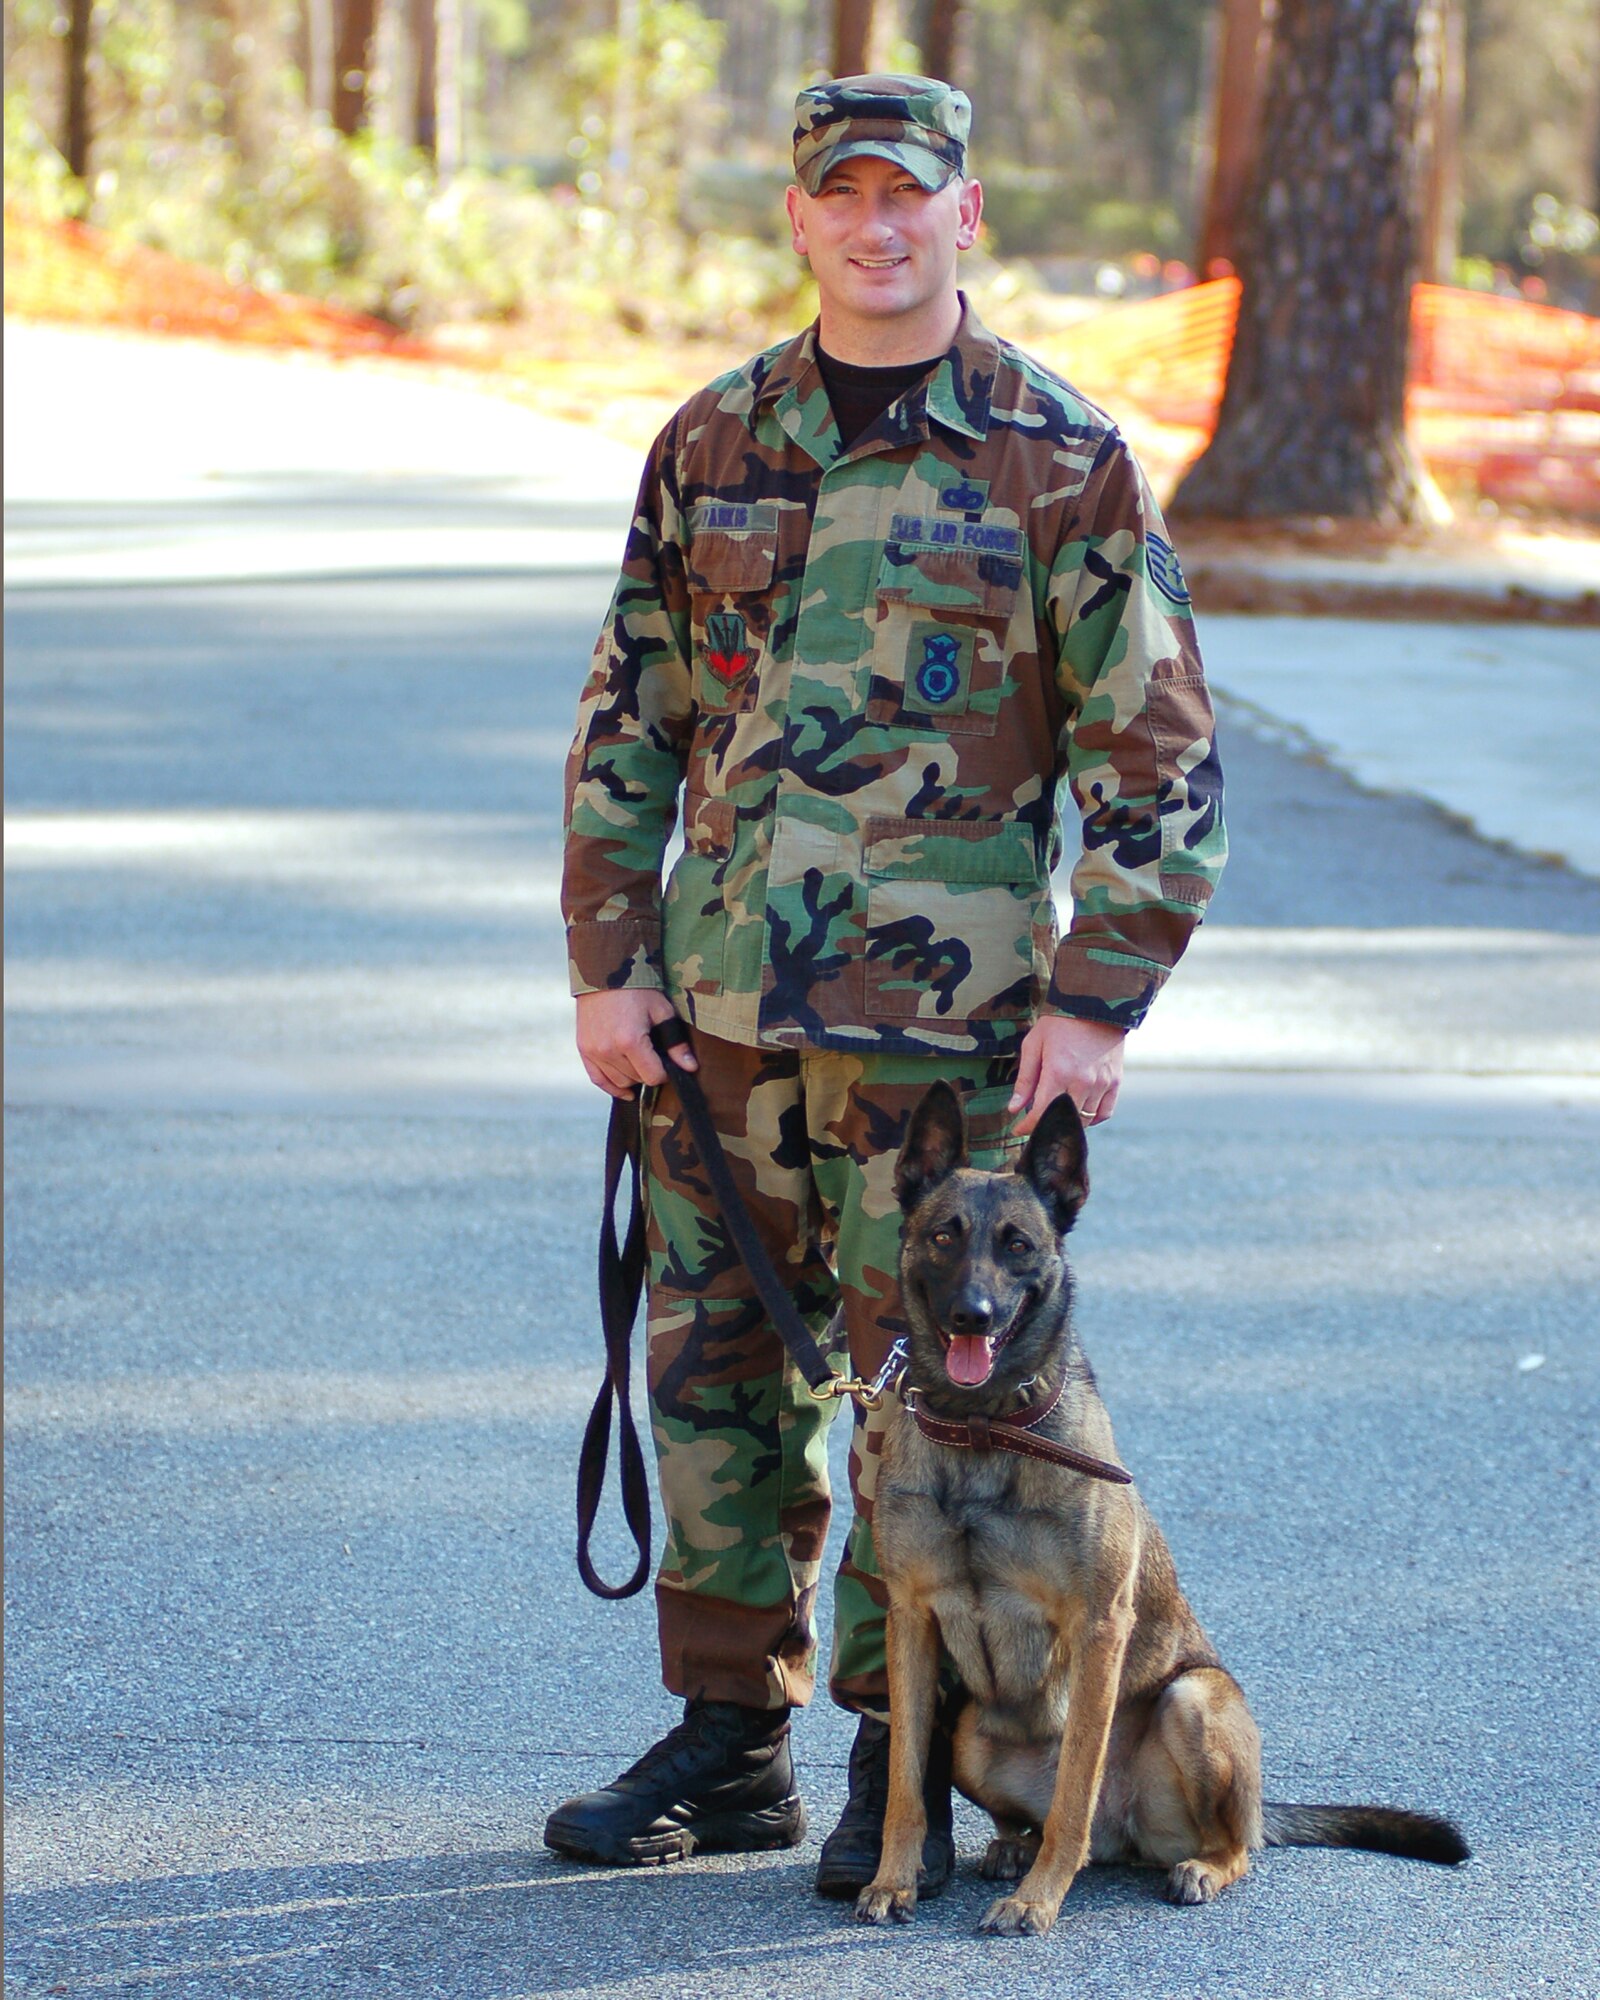 Staff Sgt. James Parkis and his military working dog, Ffifteen, take a break after agility training Dec. 28, 2006. Sergeant Parkis and Ffifteen are assigned to the 824th Security Forces Squadron, Moody AFB, Ga. (U.S. Air Force photo by Tech. Sgt. Parker Gyokeres)